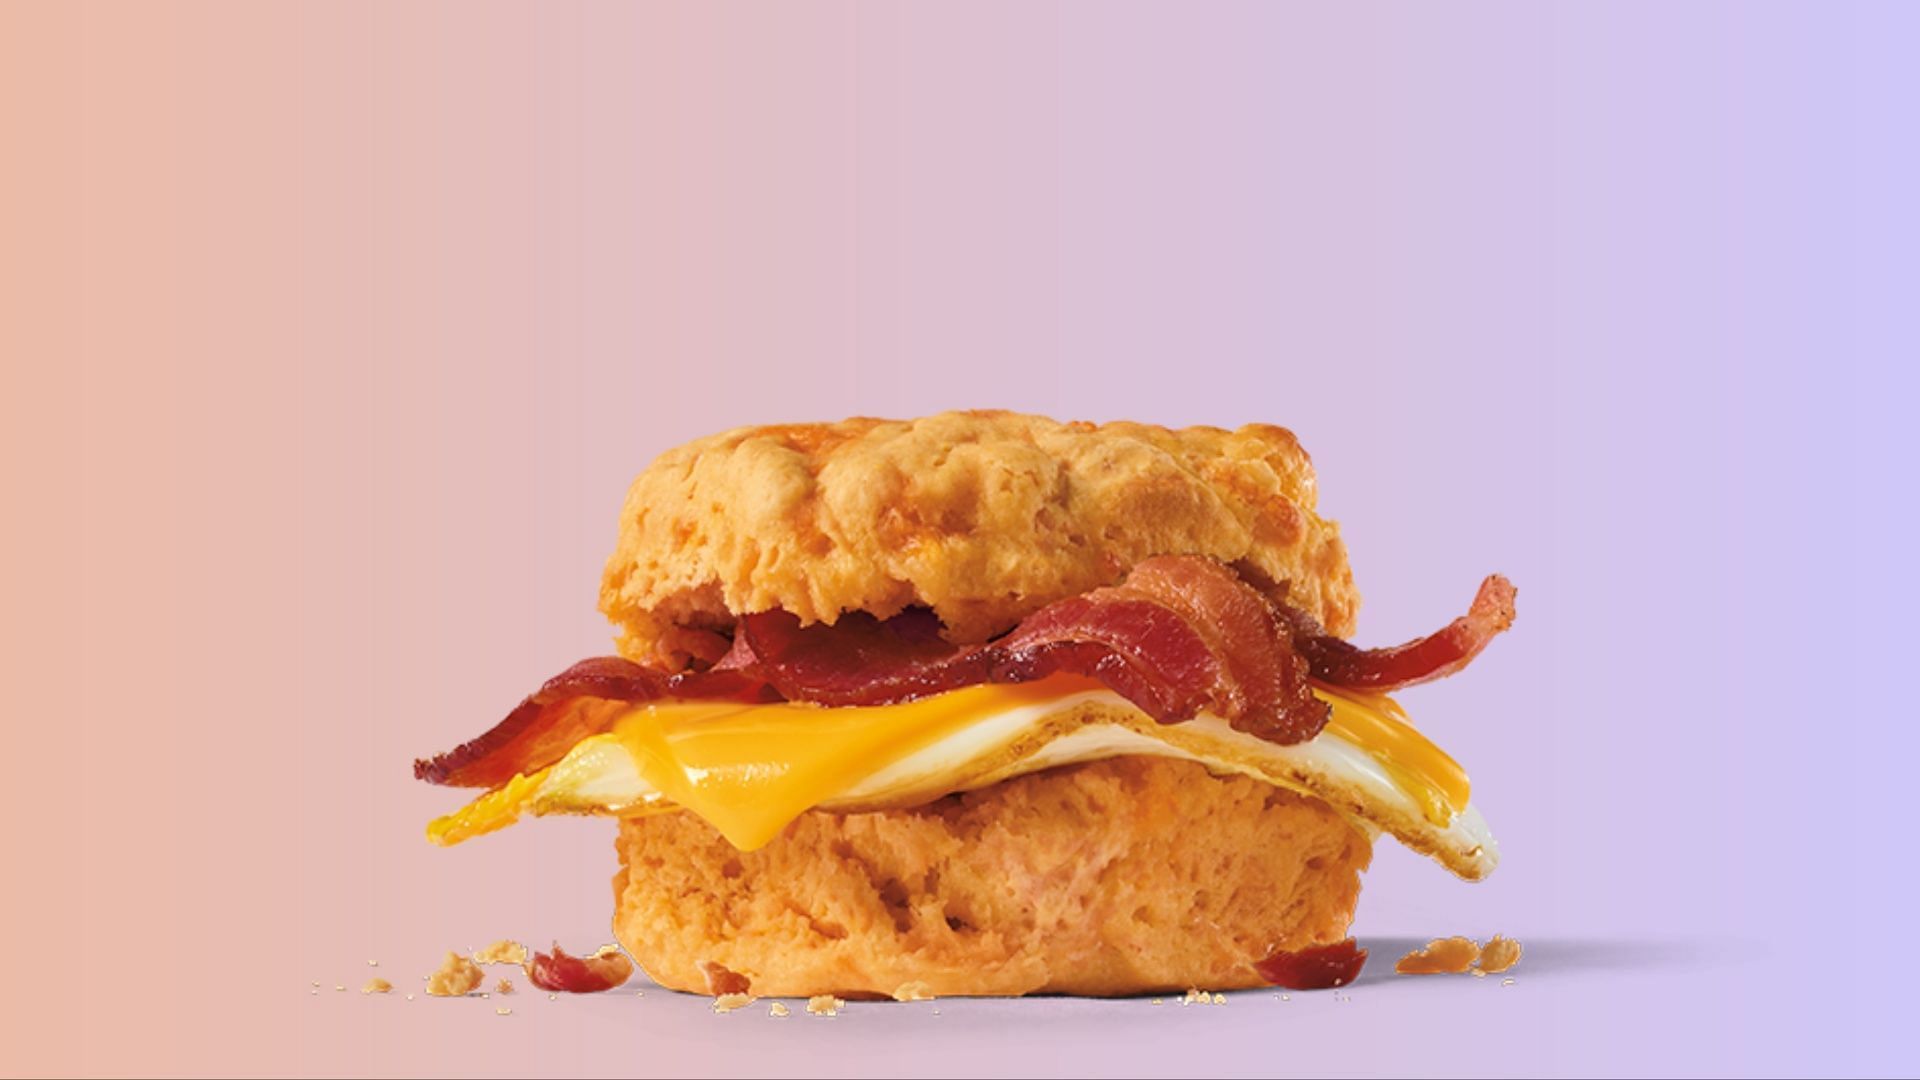 Bacon Cheddar Biscuit Breakfast Sandwich (Image via Jack in the Box)